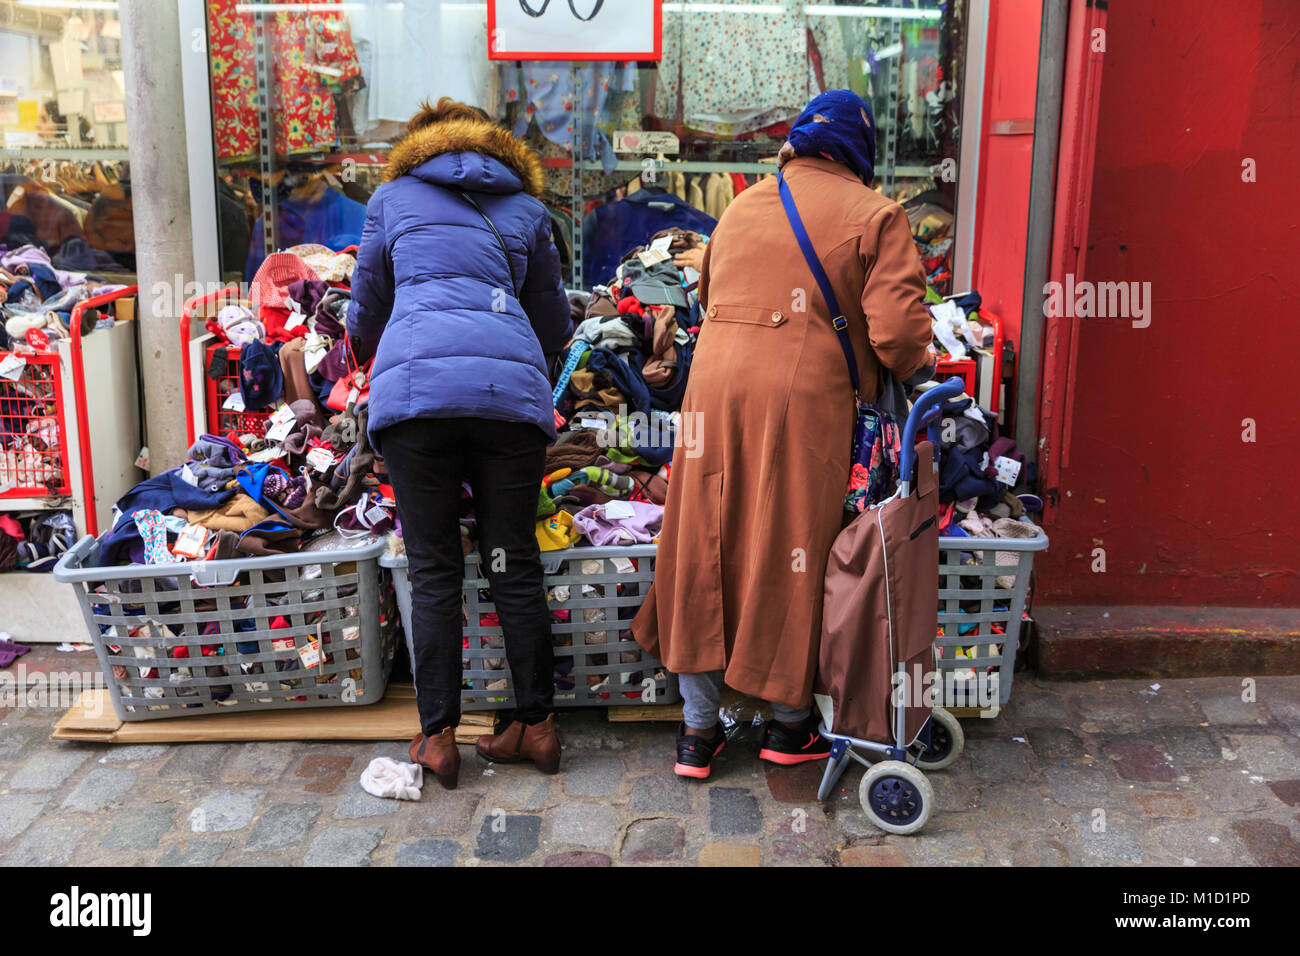 Bargain shopping, shoppers browse the heaps of cheap bargain clothes at shops and stalls in Quartier Pigalle, Paris, France Stock Photo